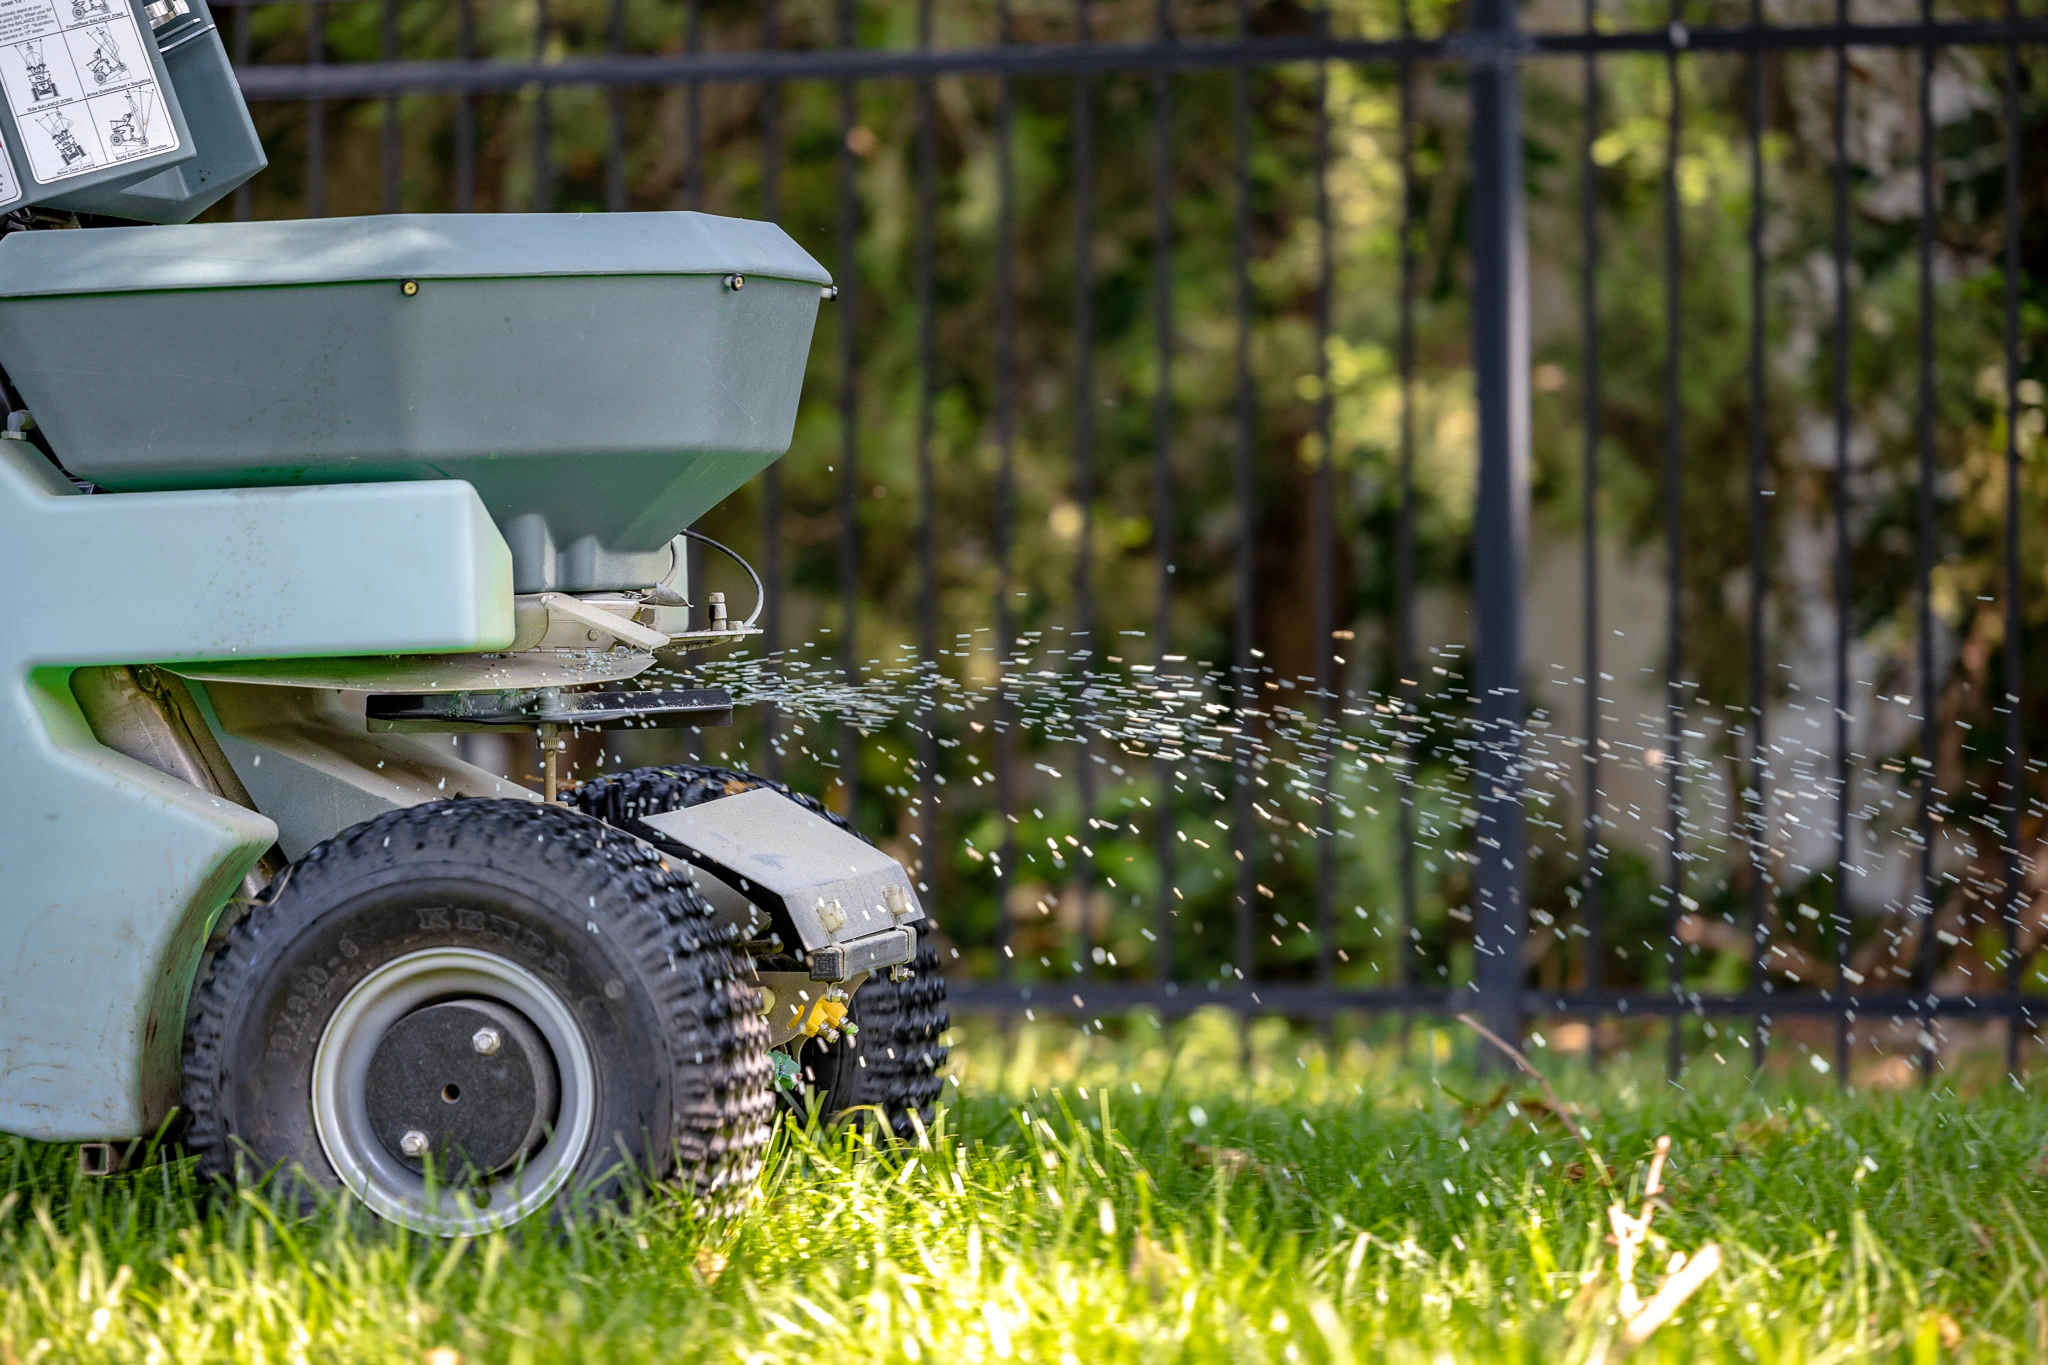 Spring Lawn Maintenance Checklist for Central Indiana Homeowners